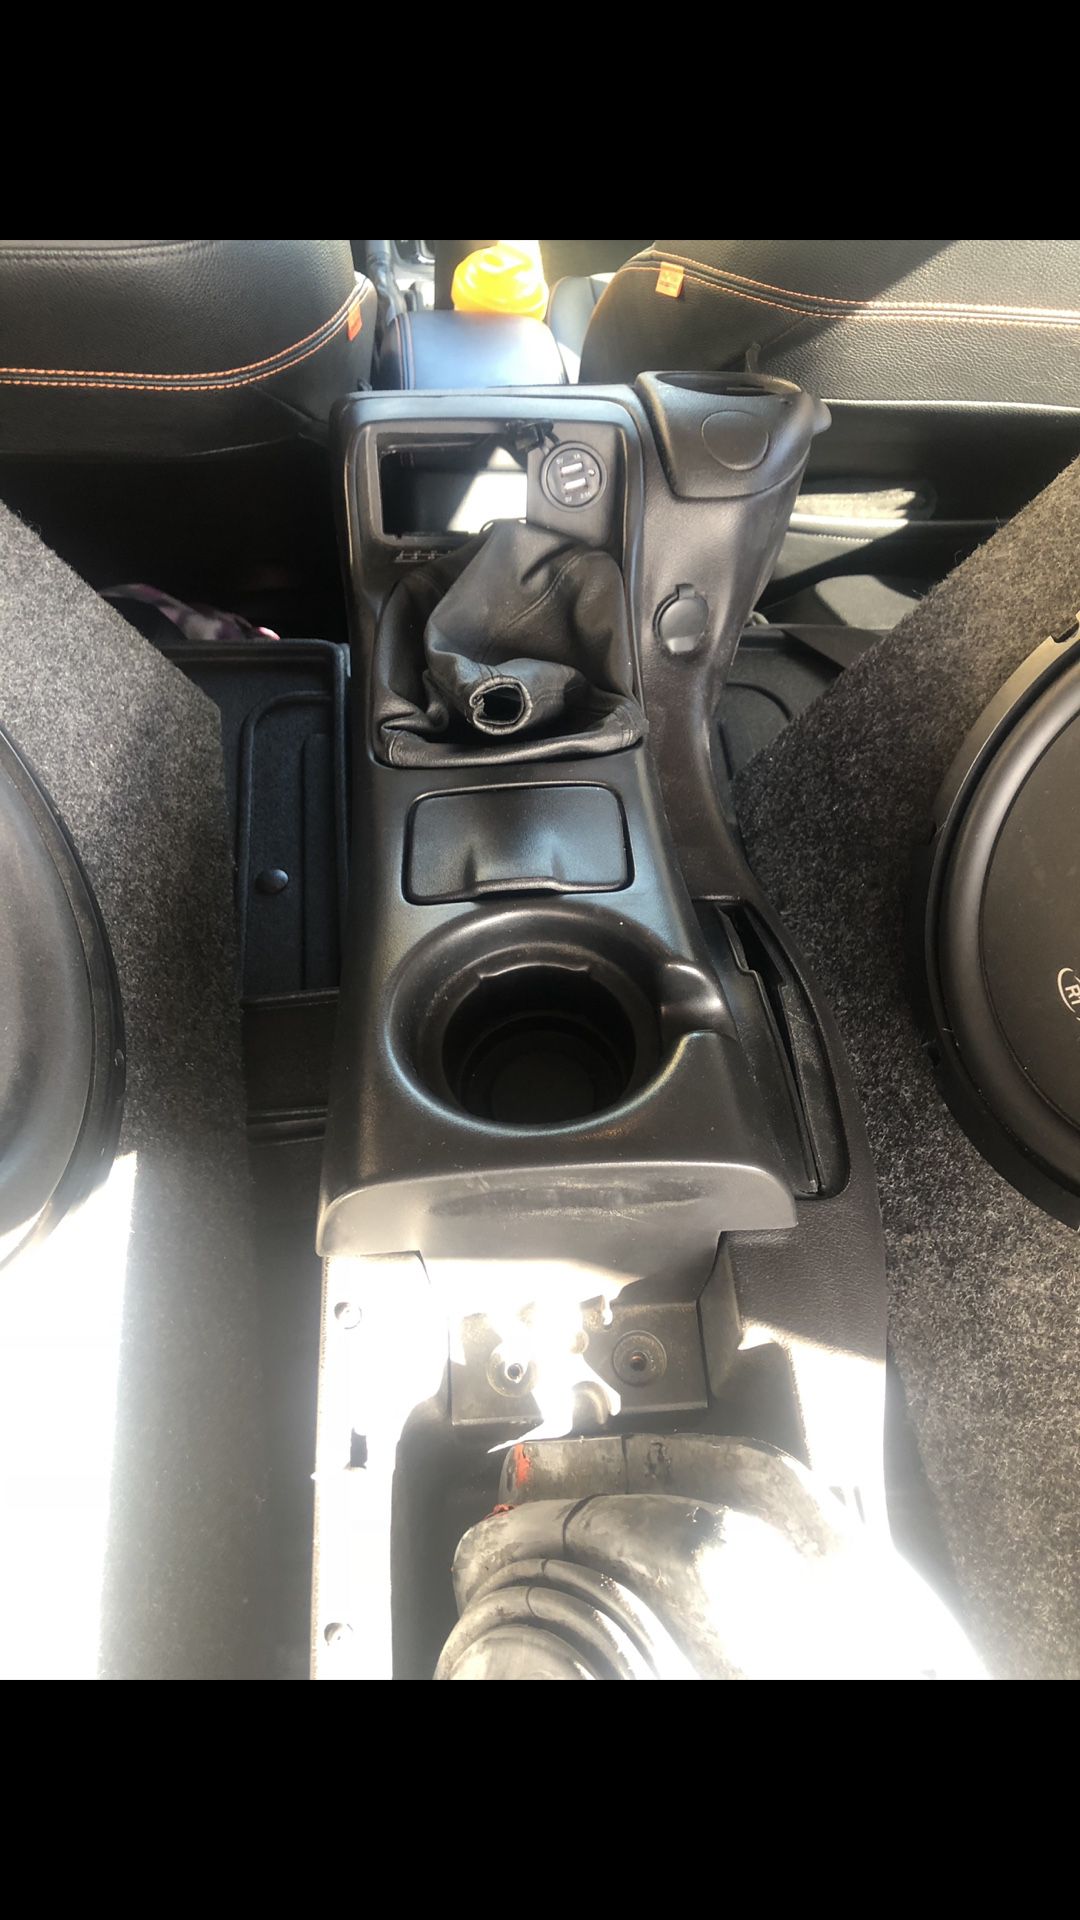 Ls1 t56 center console came off my 99 ws6